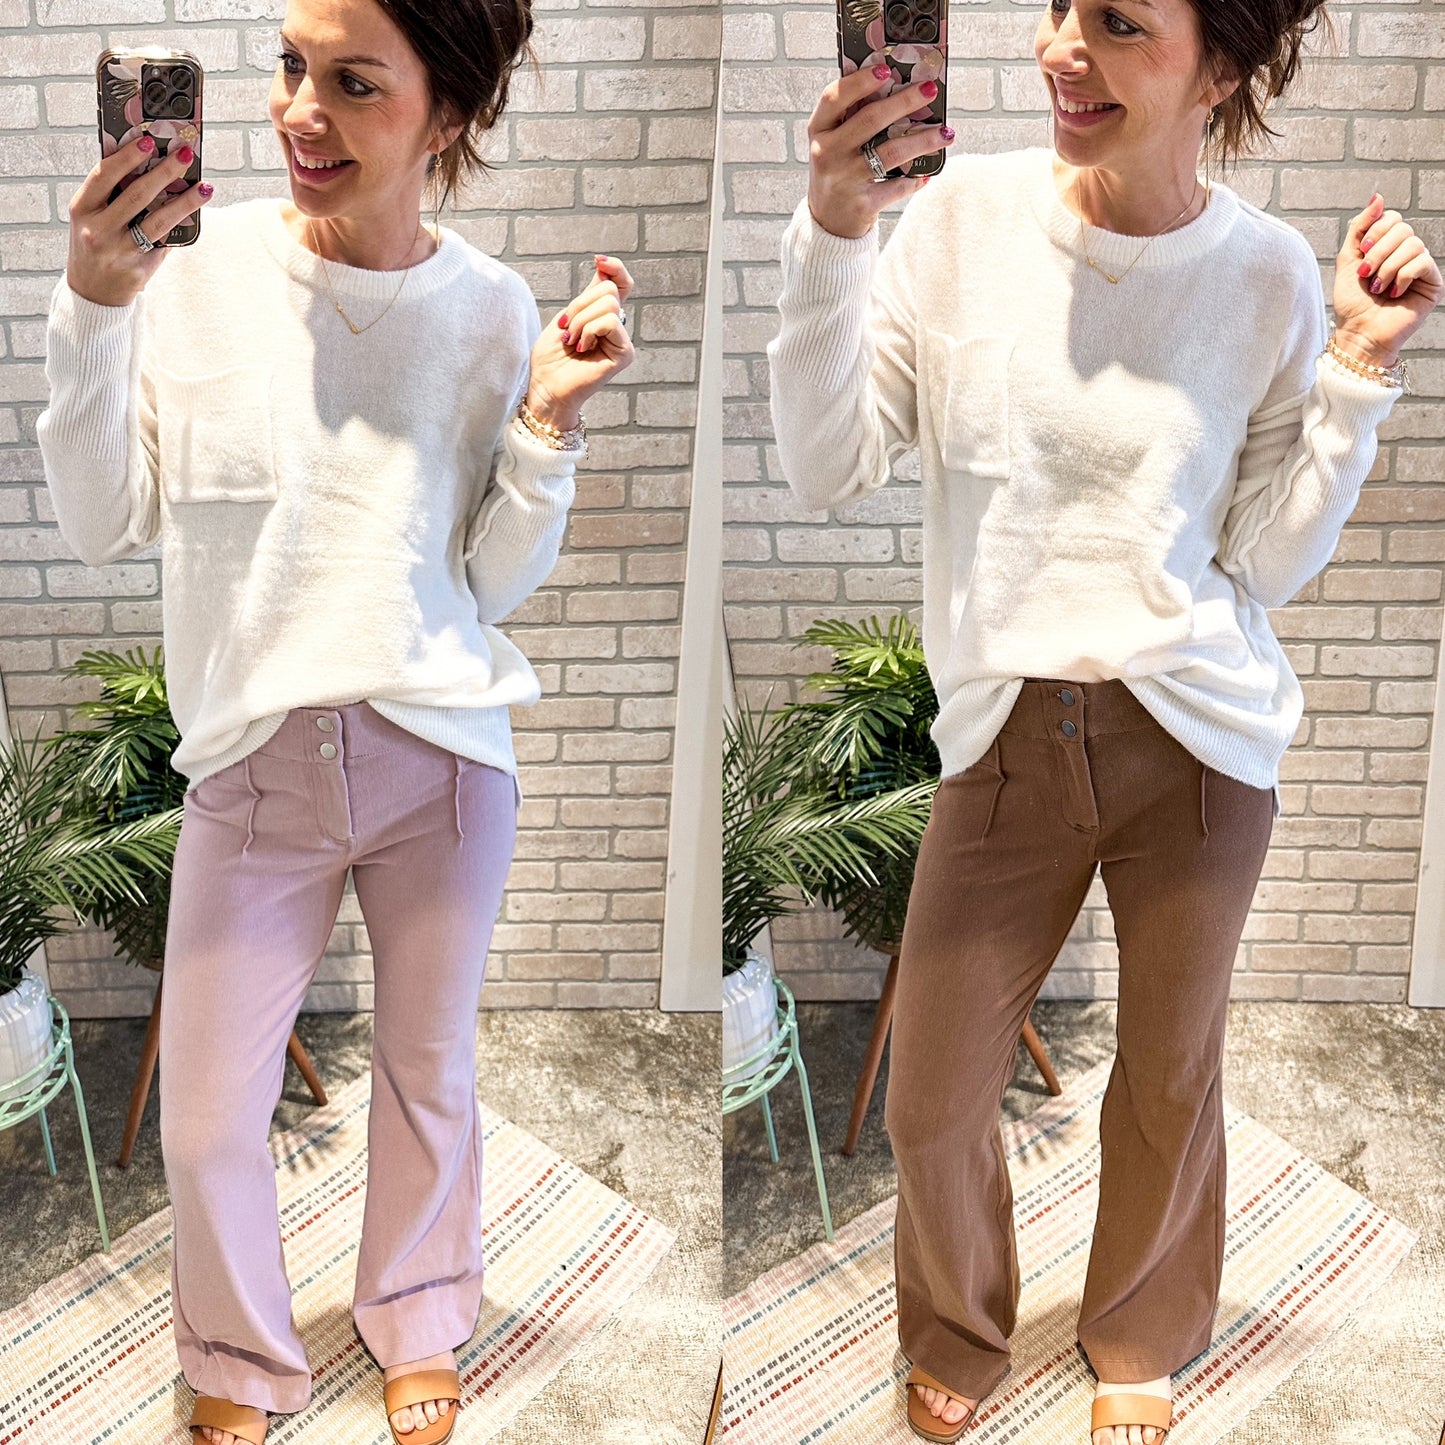 The Amelia Cotton Stretch Twill Flared Pants